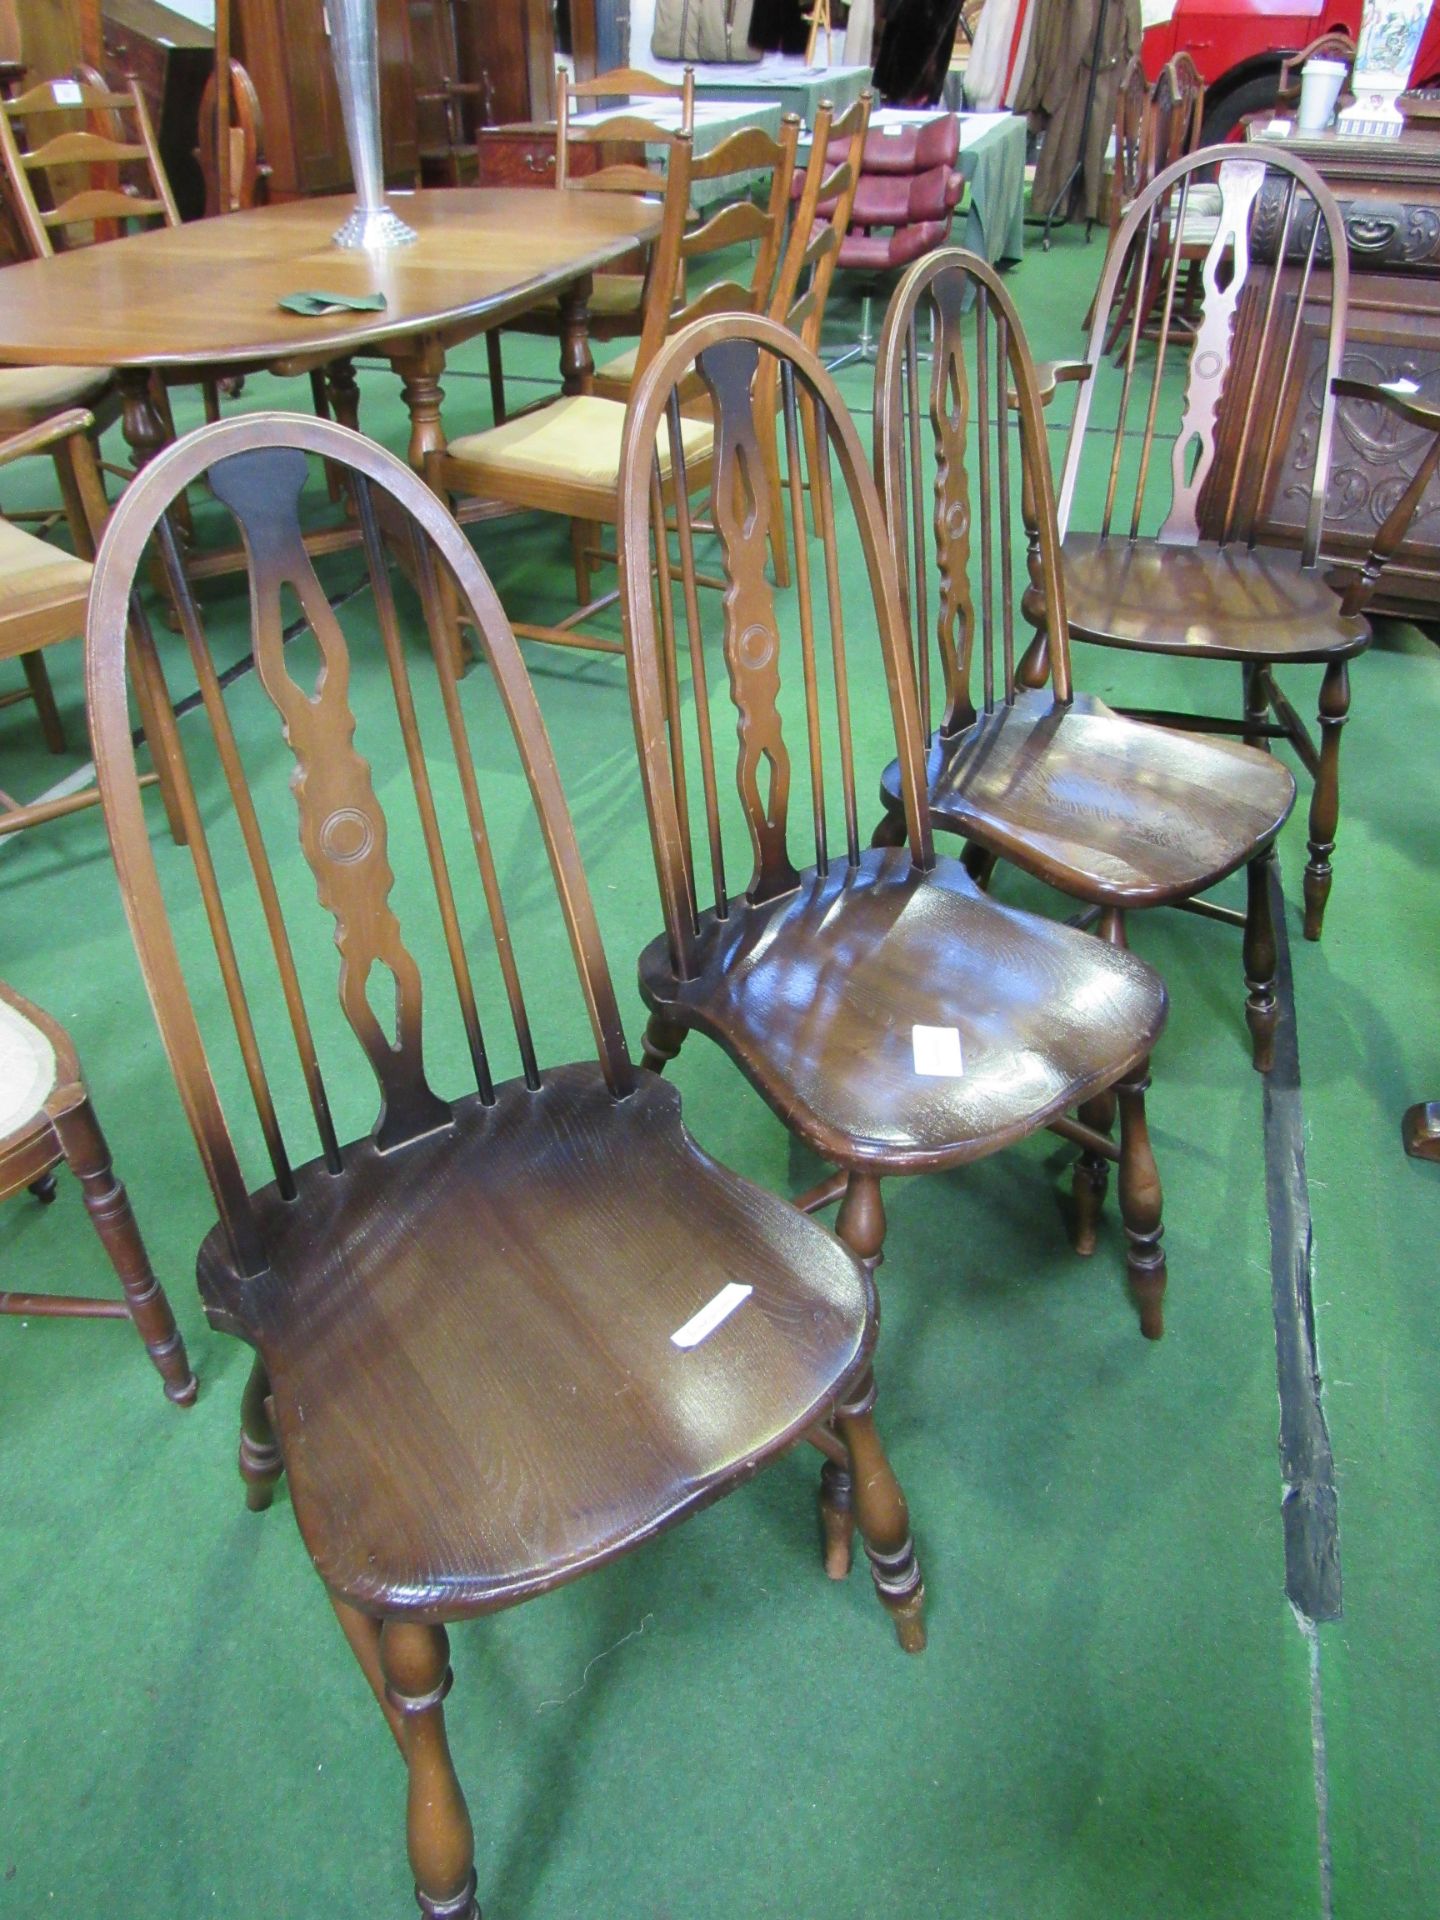 6 rail back shaped seat chairs and 2 matching carvers. Estimate £40-60.